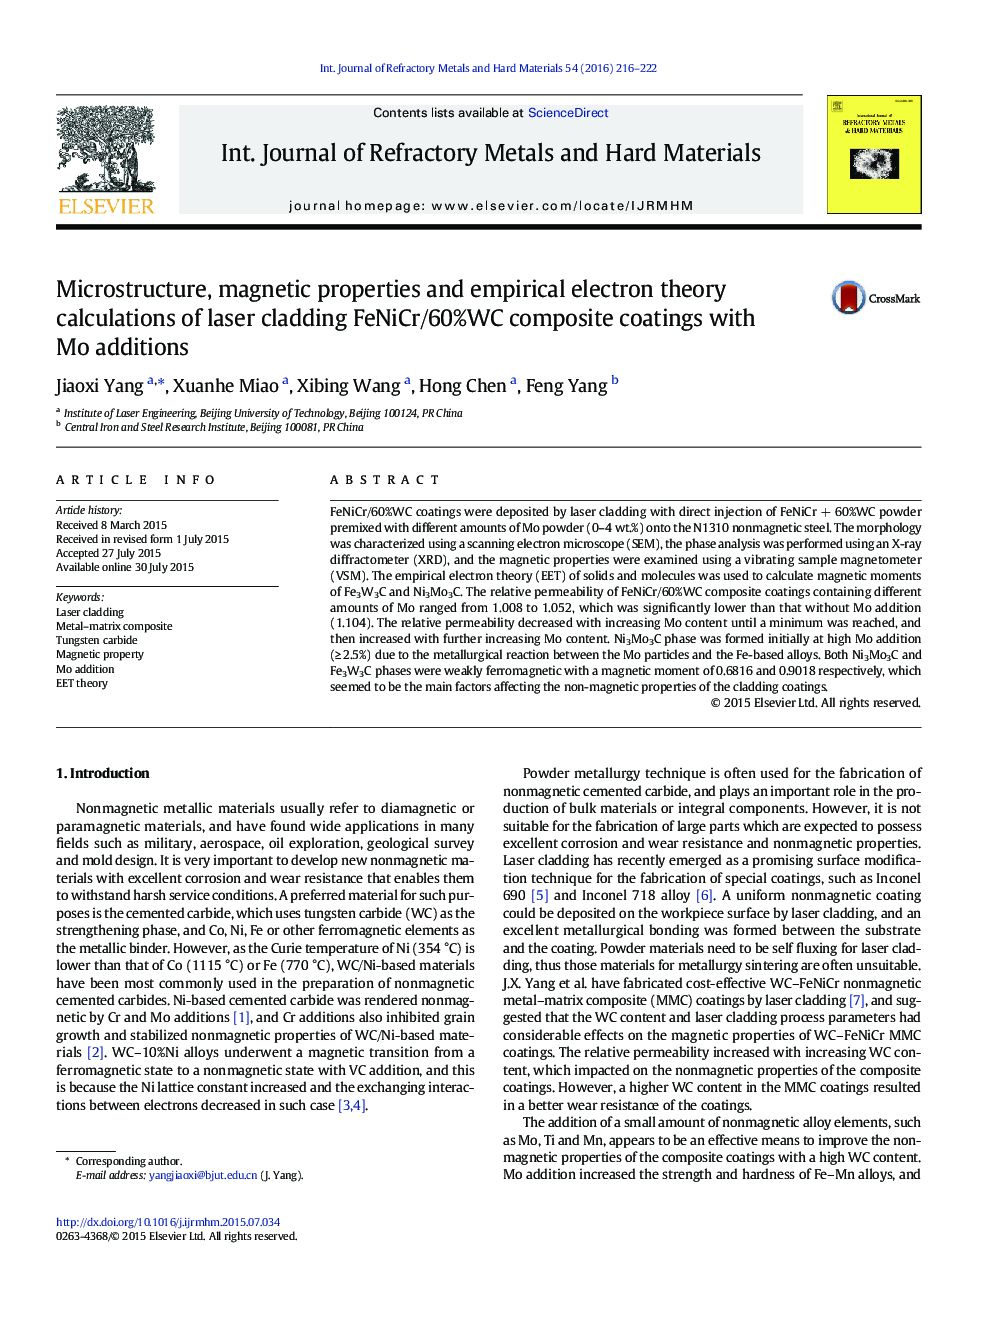 Microstructure, magnetic properties and empirical electron theory calculations of laser cladding FeNiCr/60%WC composite coatings with Mo additions